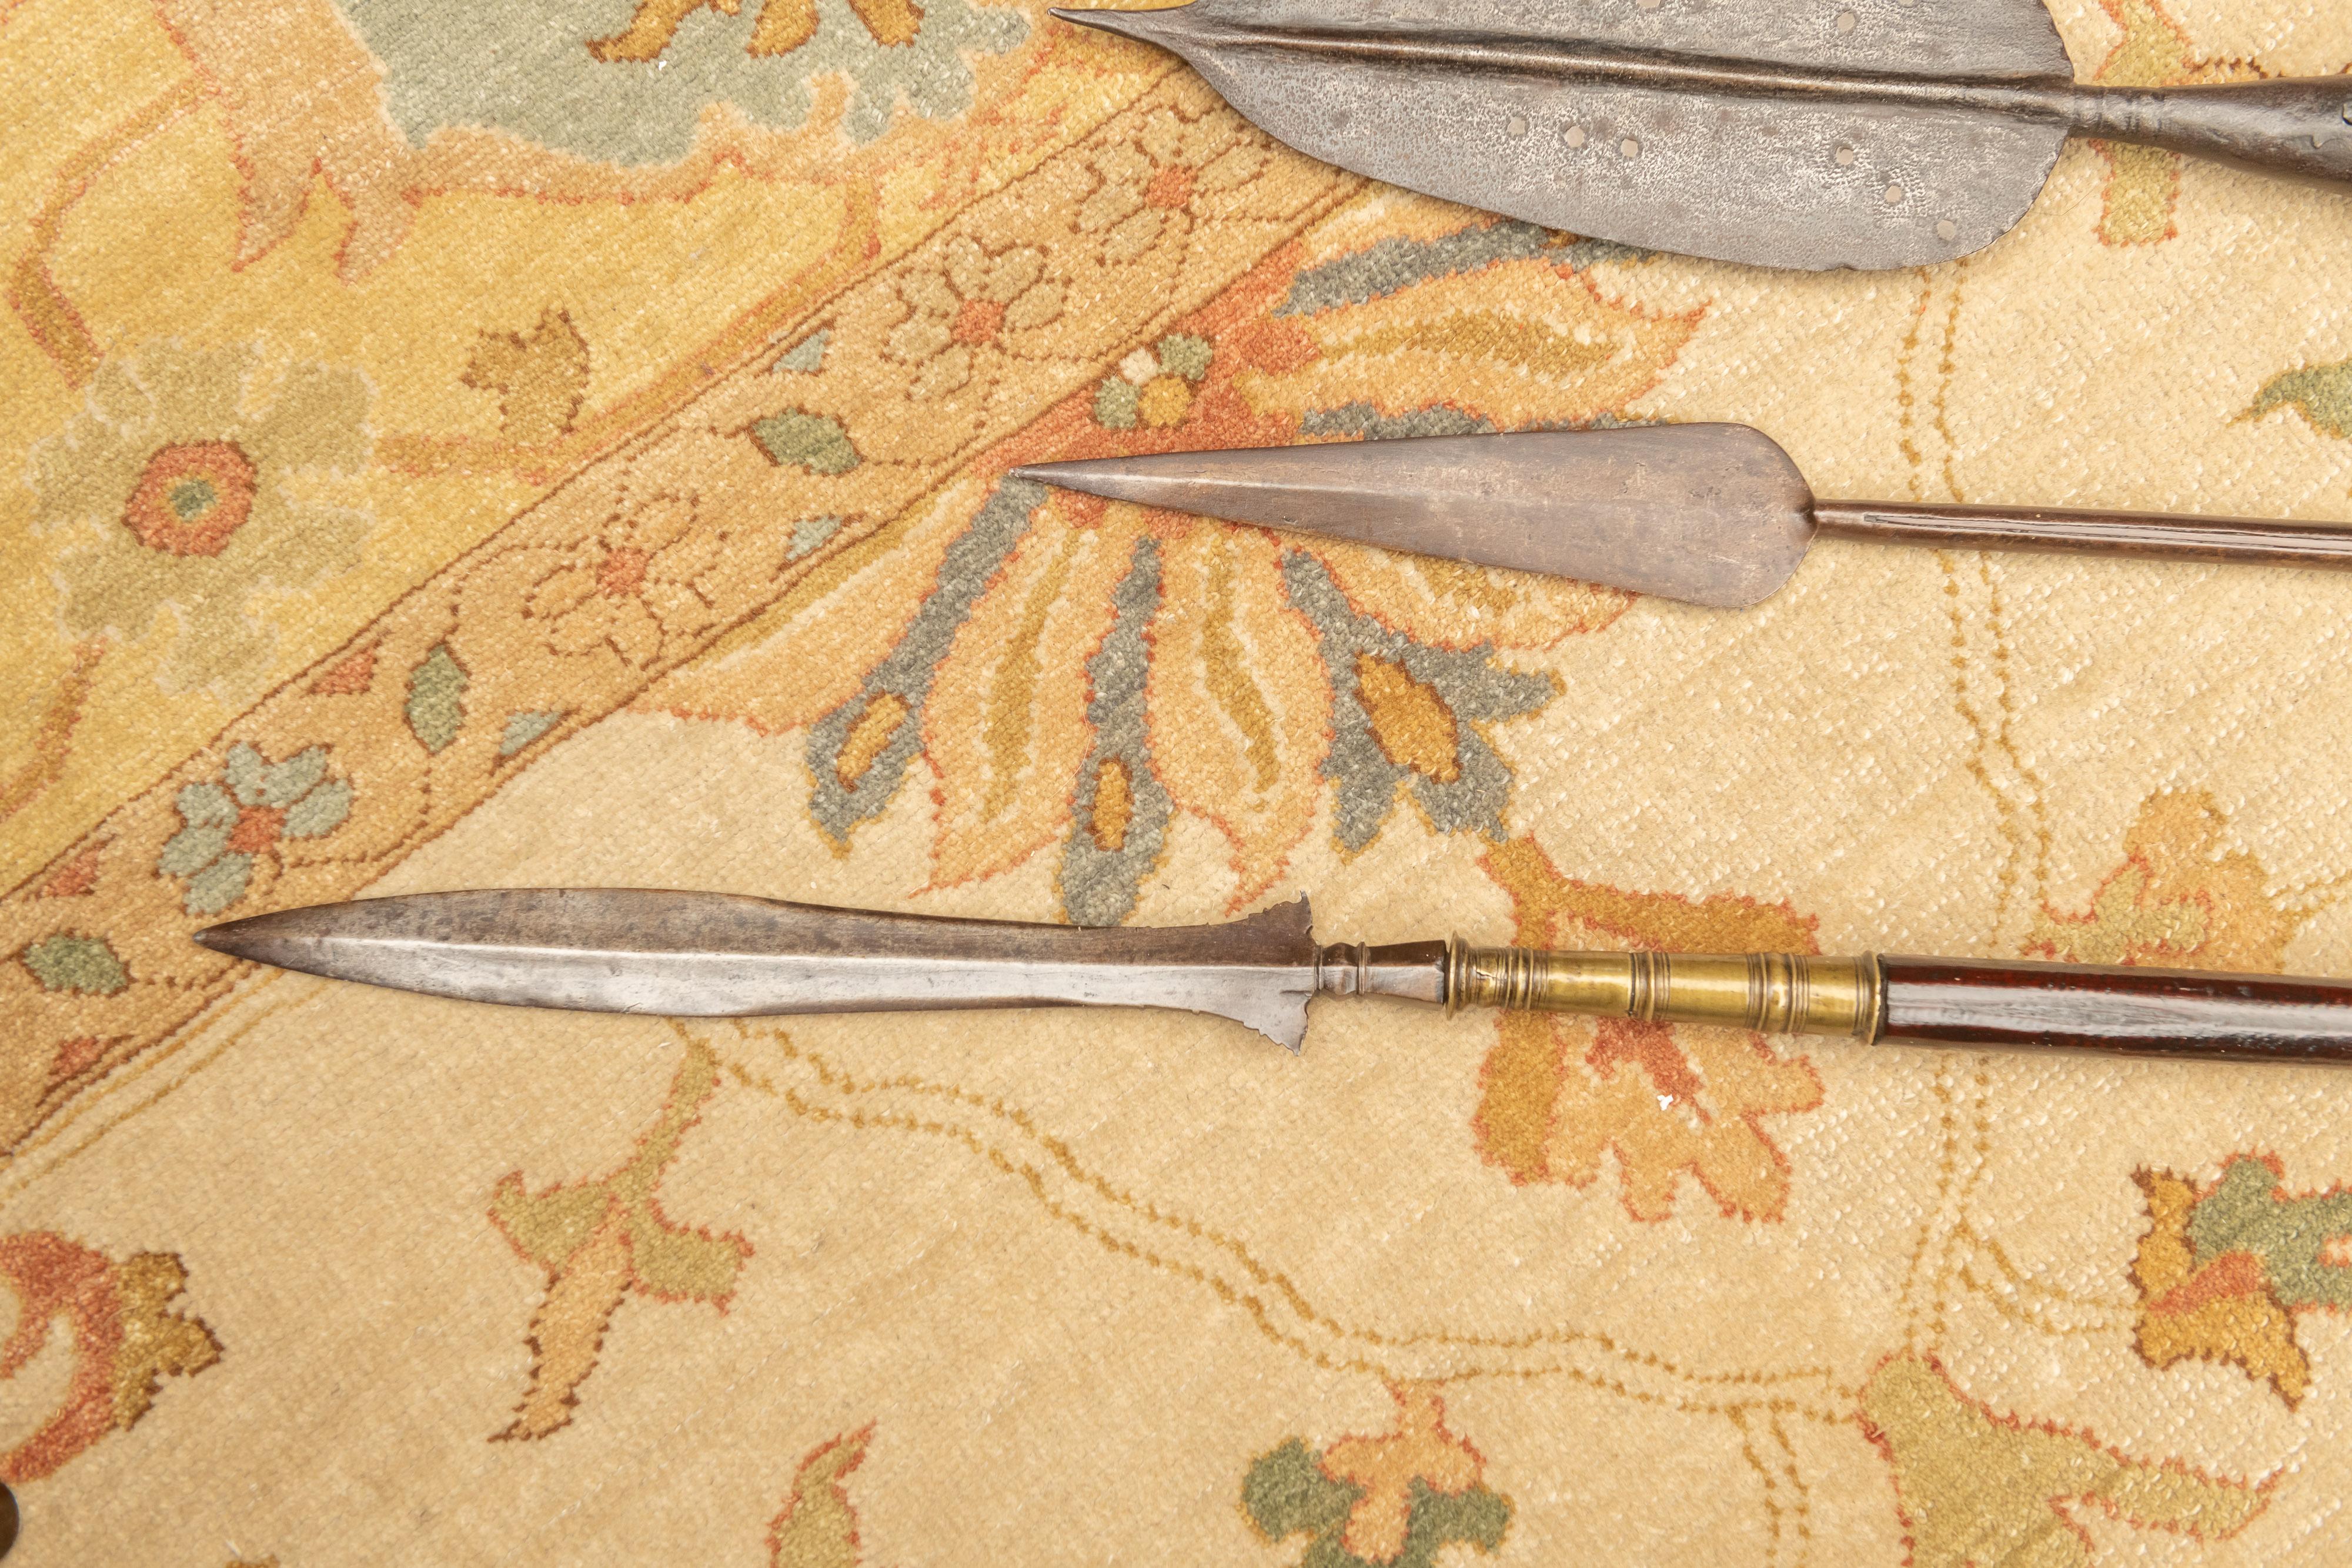 Three elegant African forged steel and exotic hardwood spears.
Three different spear heads hand forged and mounted to dark hard wood handles. Very deep patina overall. These are serious weapons.
Said to have been collected in the former Belgian